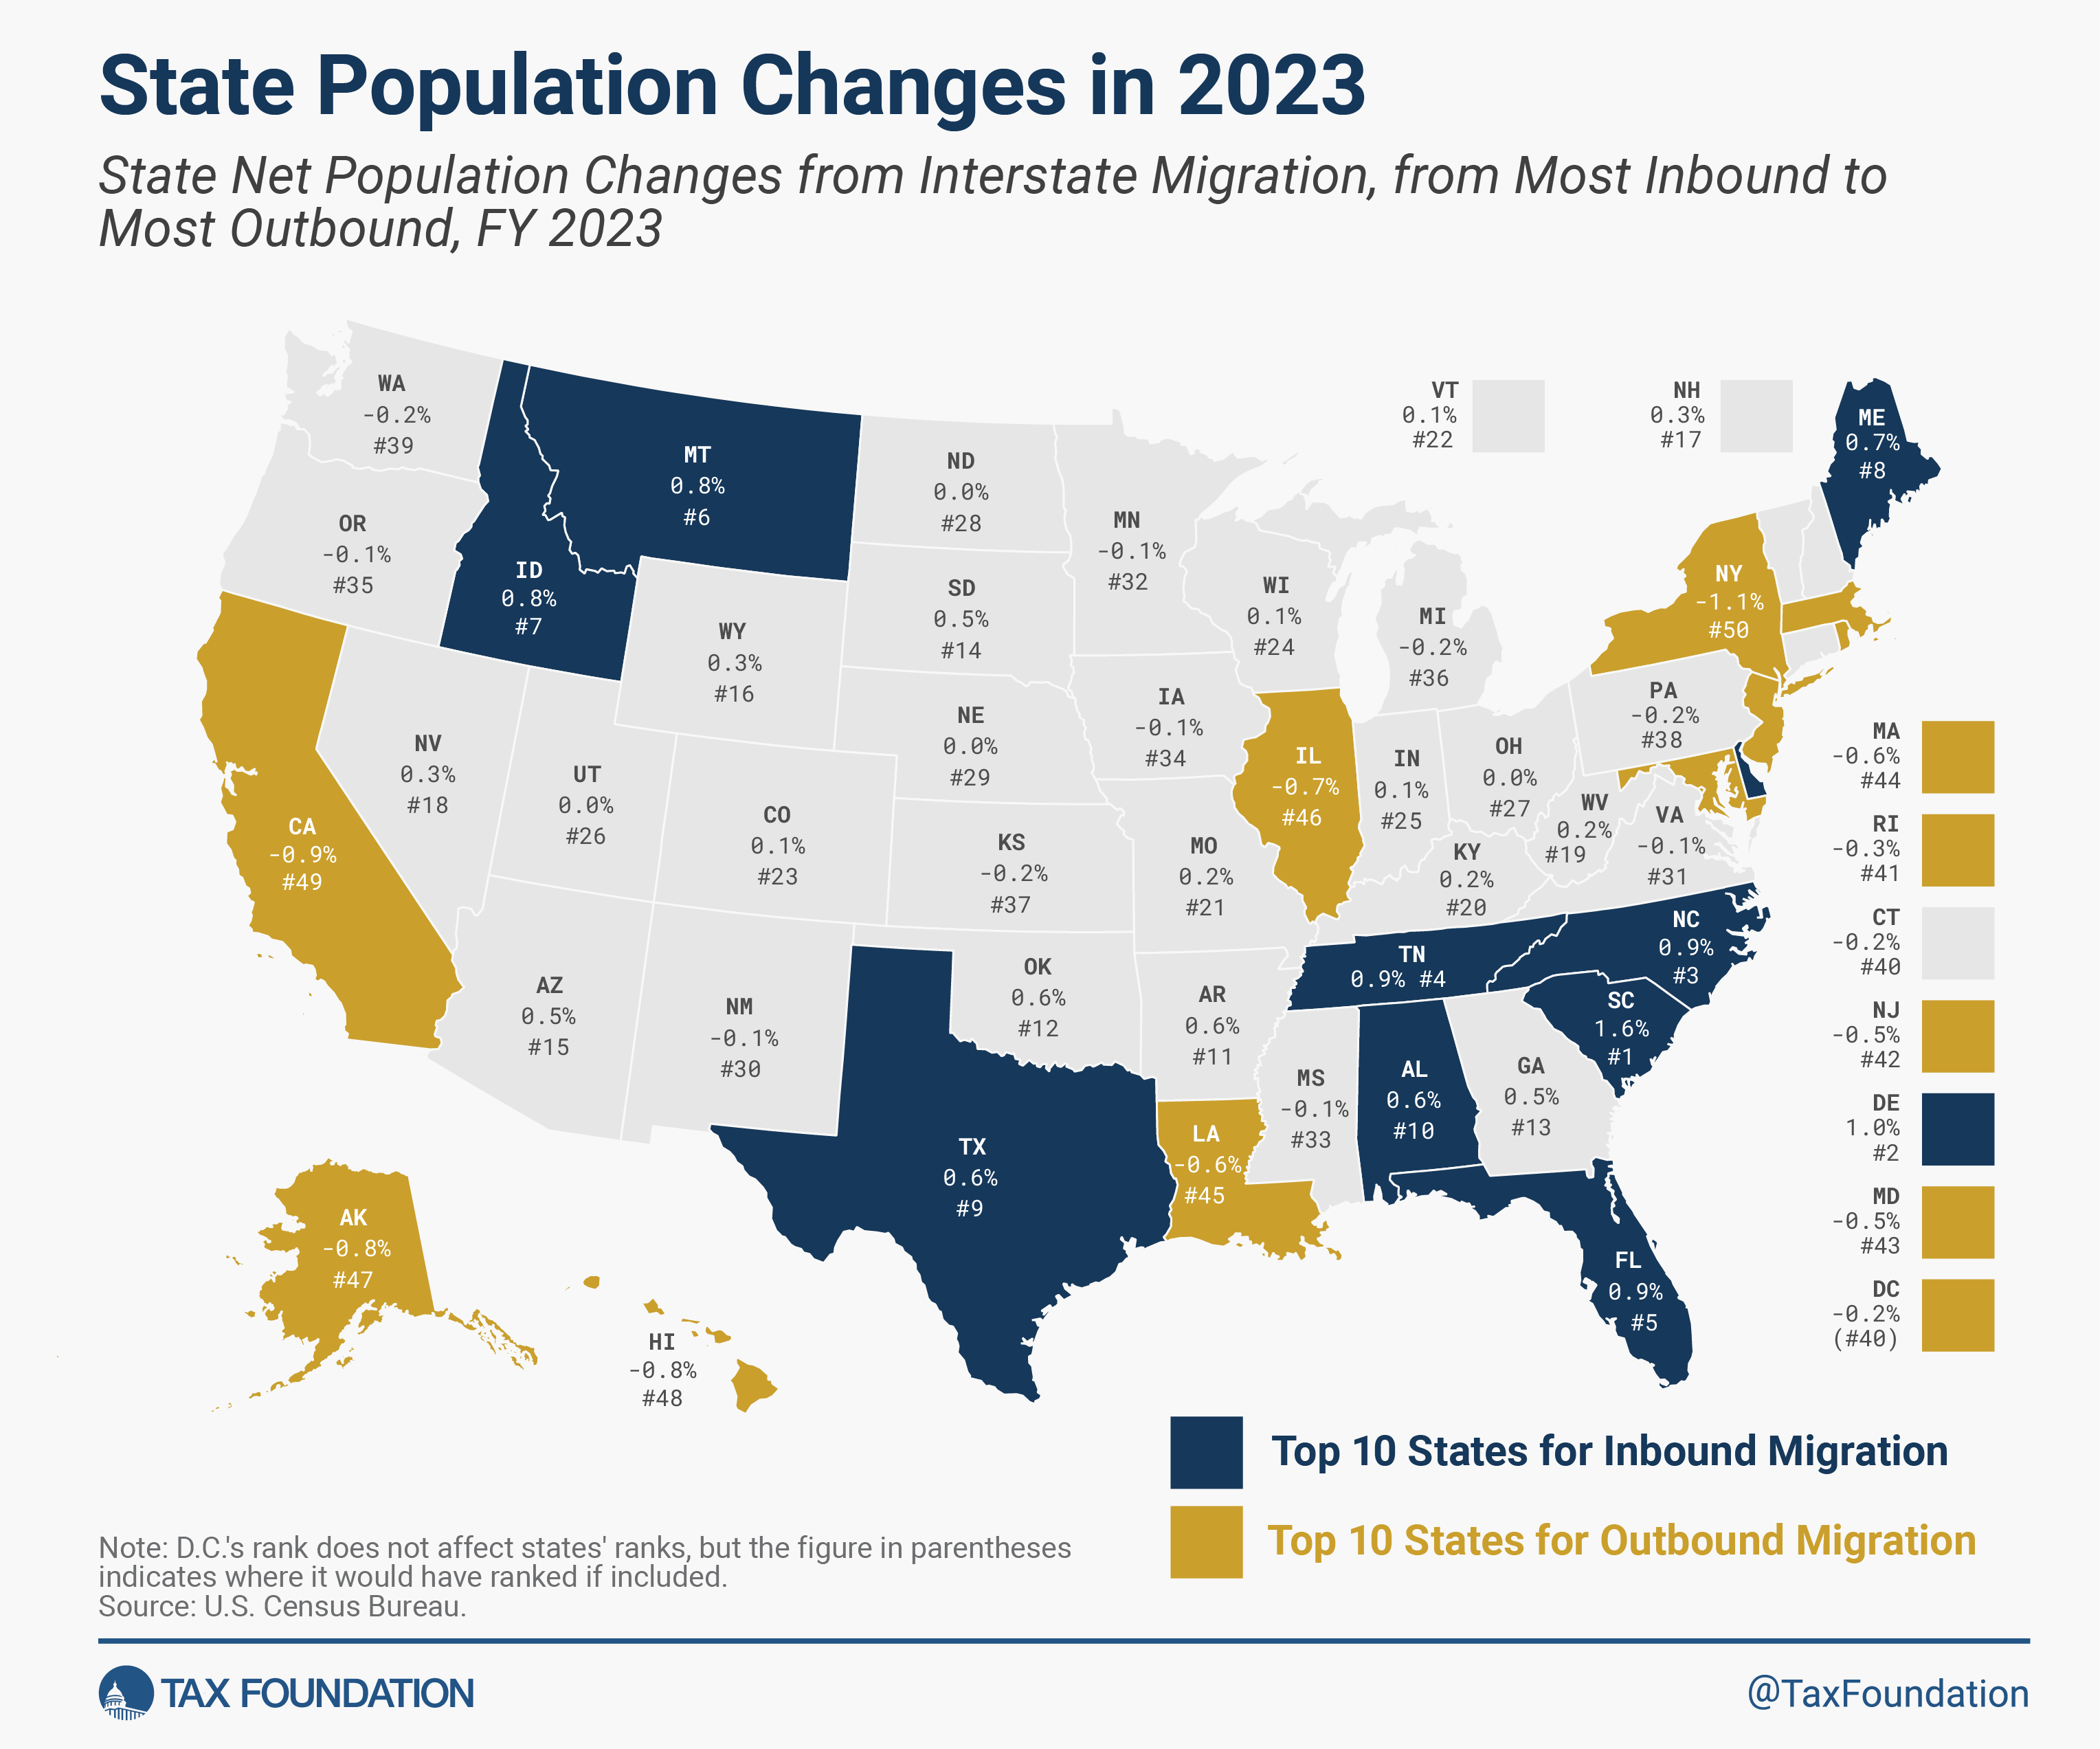 Americans Moved to LowTax States in 2023—Tax Foundation Report